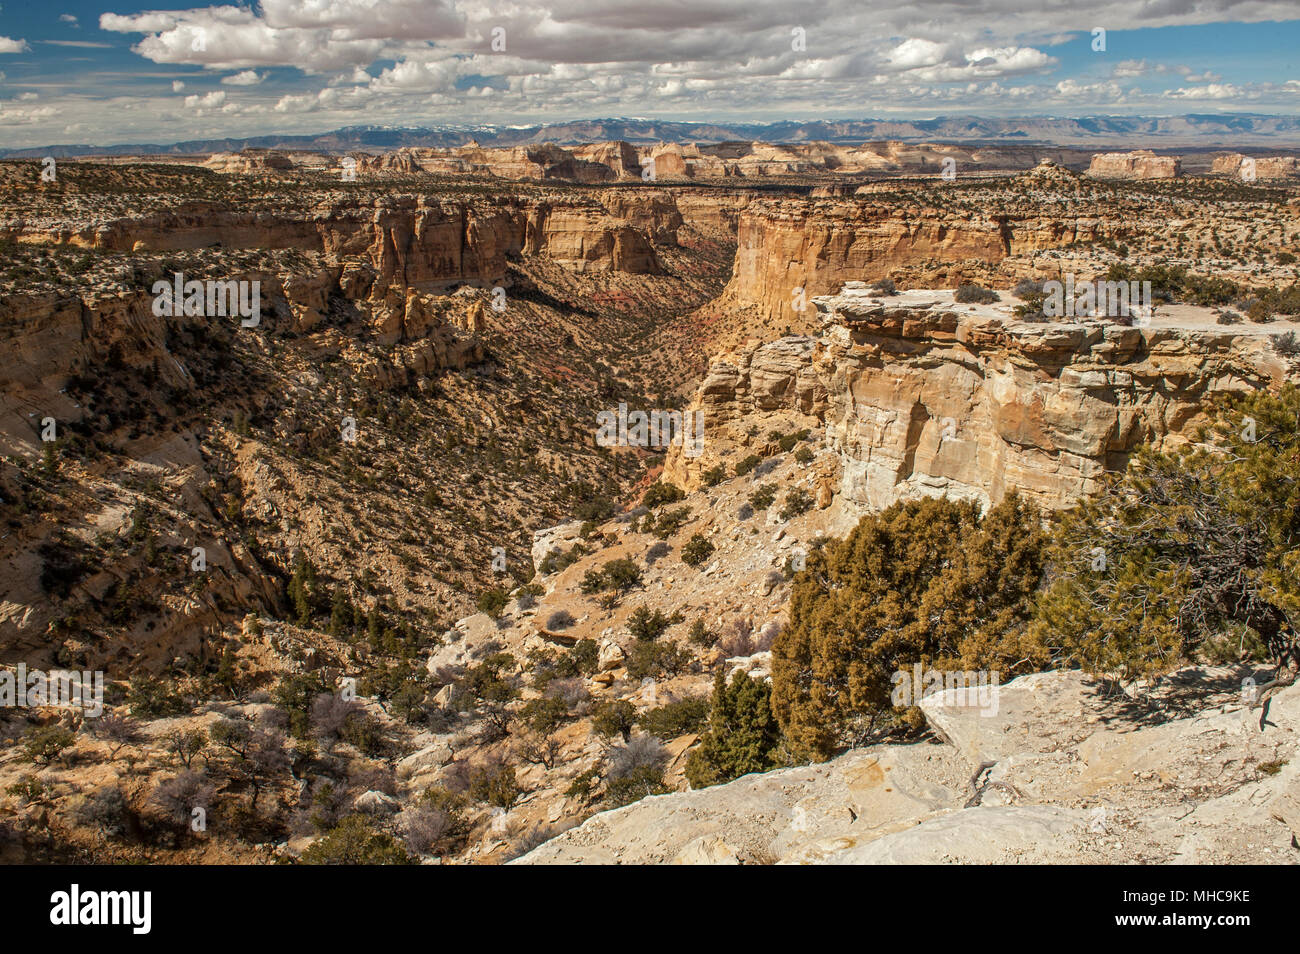 The South Fork of Coal Wash in the San Rafael Swell, as seen from a viewpoint along Interstate 70 in central Utah. Stock Photo